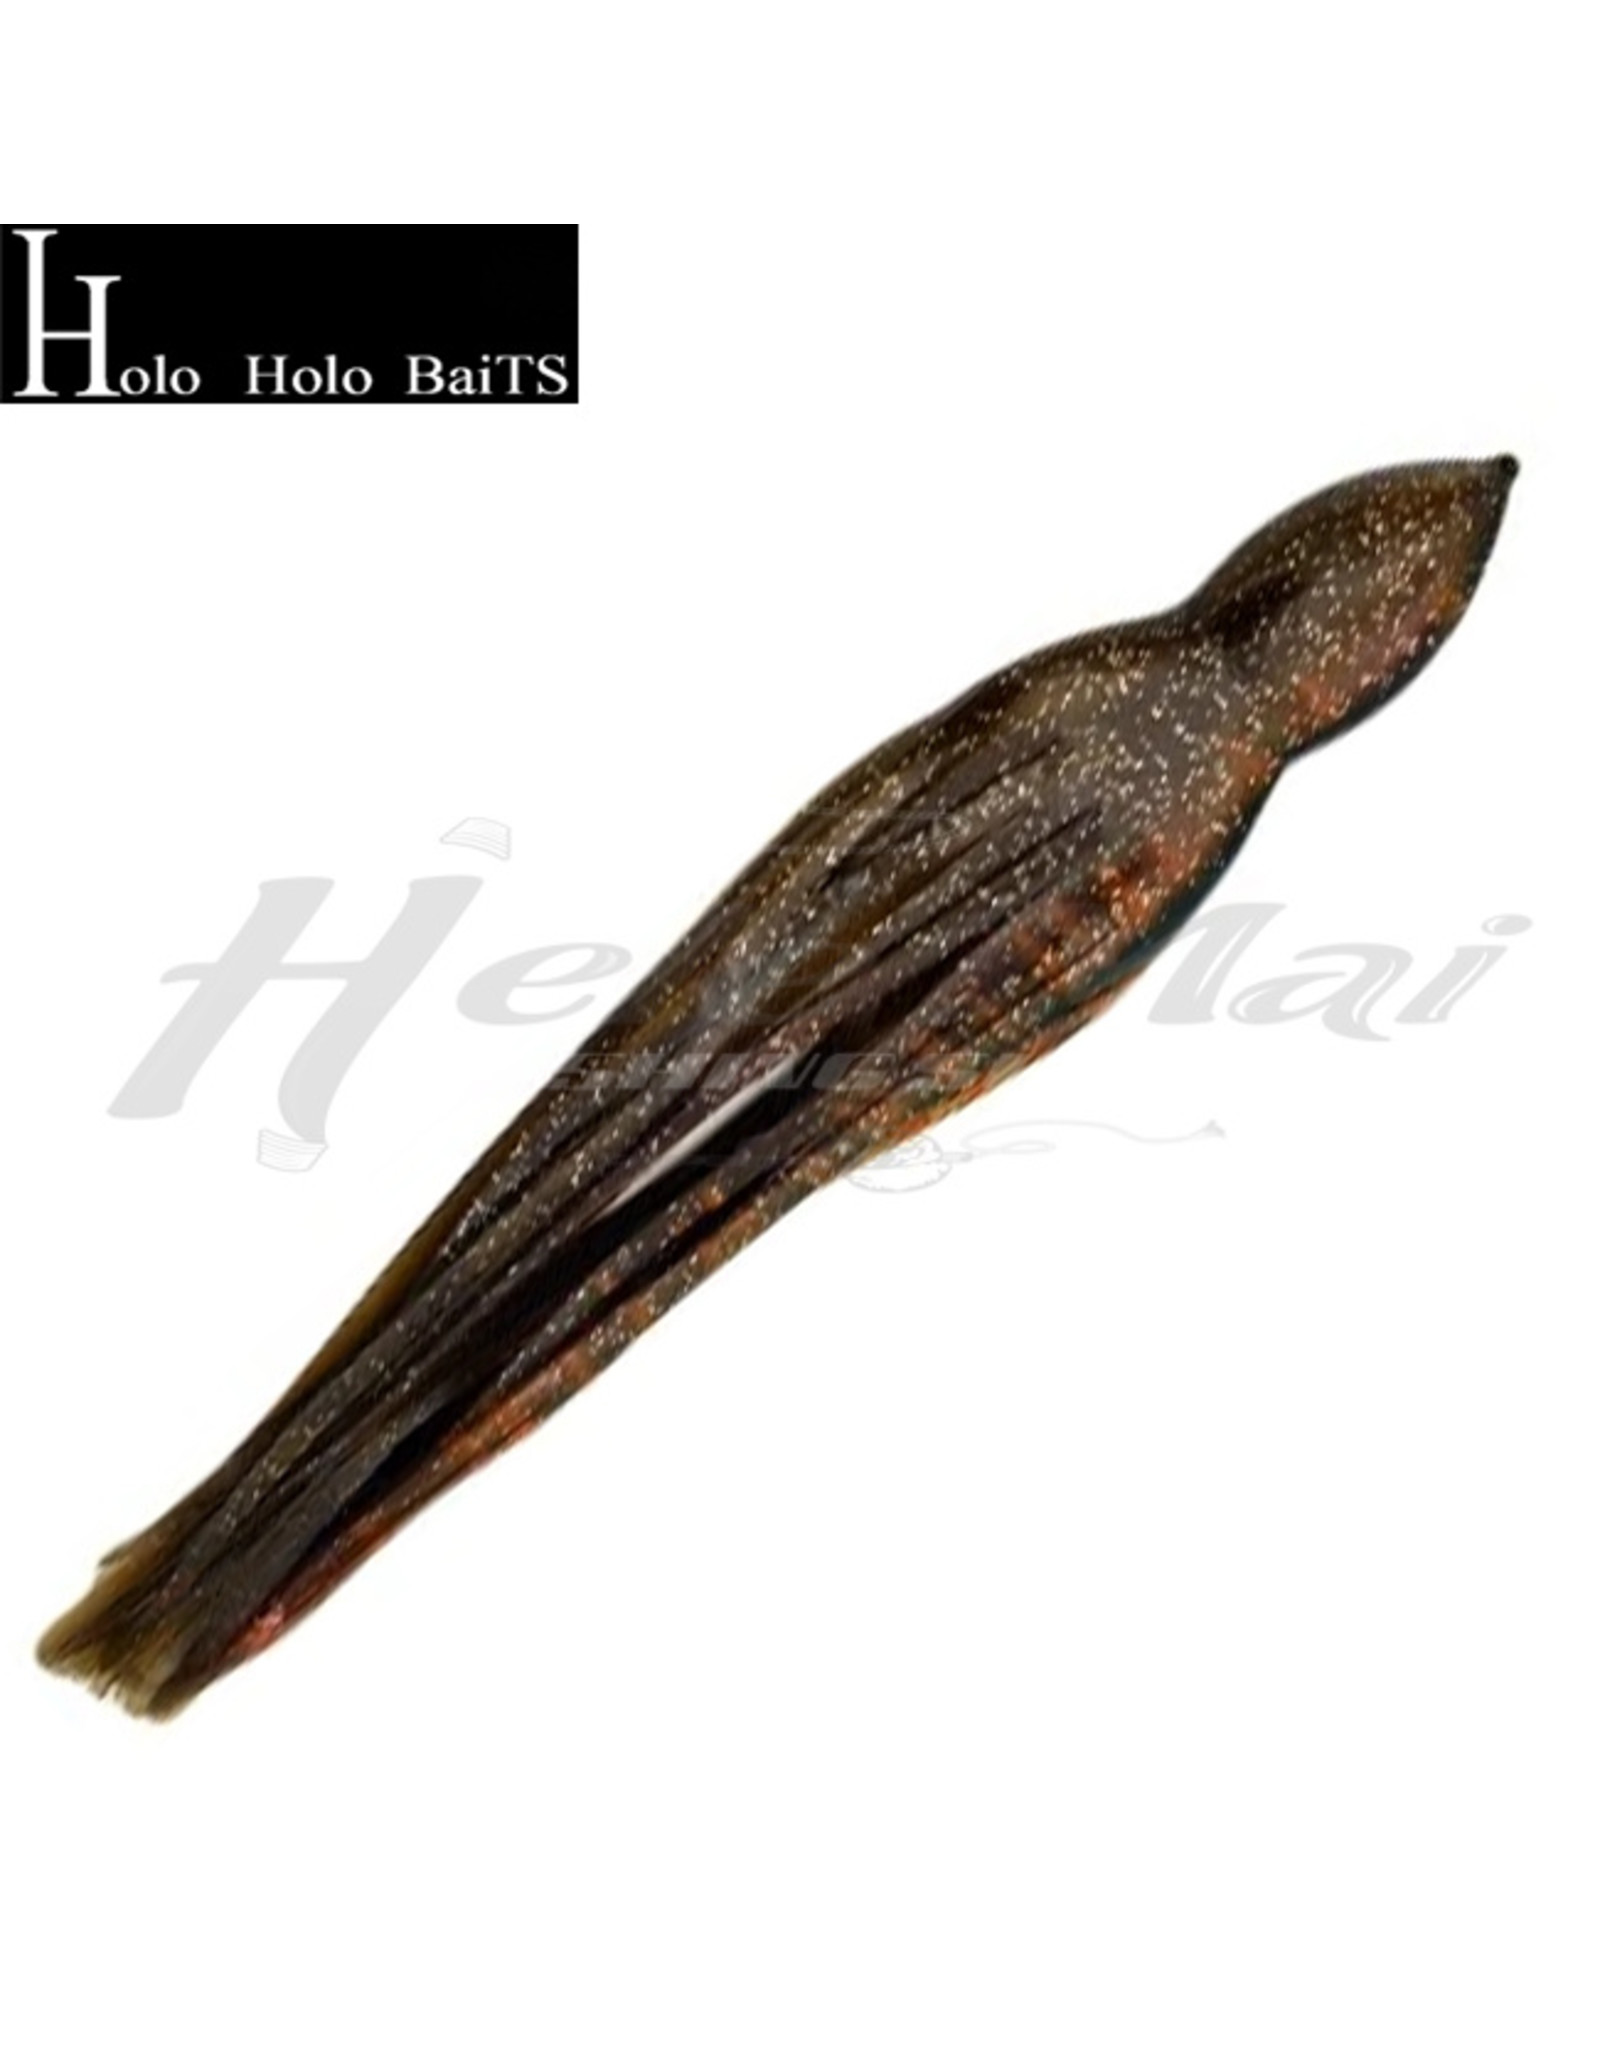 HOLO HOLO Squid Skirt, 7" Rootbeer, 0672